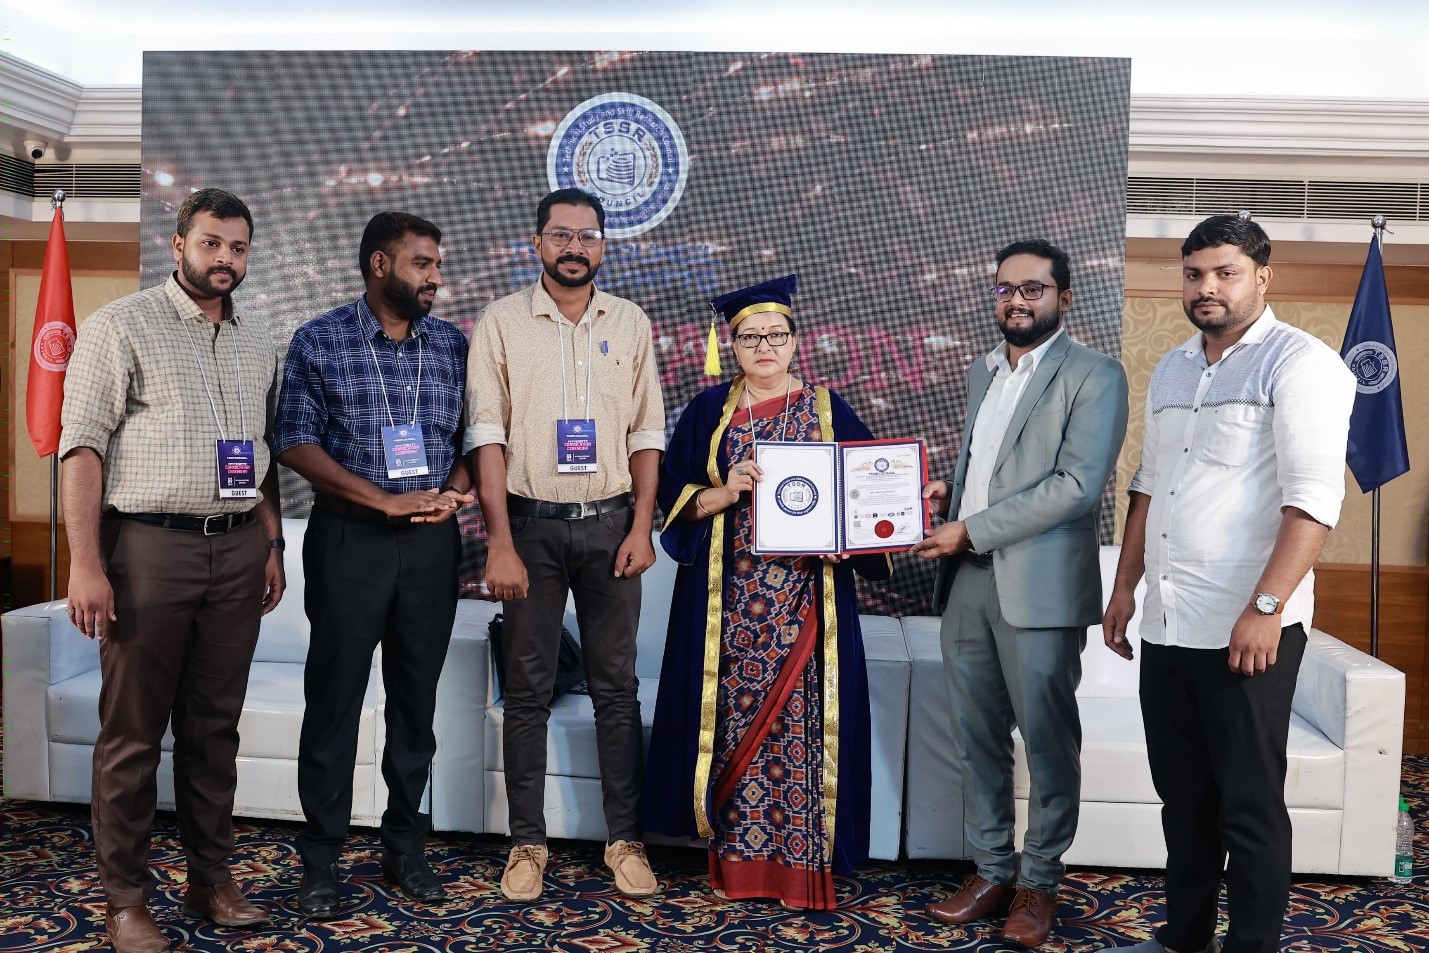 Sasmita Mohanty, Director of Sanjay Godhawath International School, Receives Prestigious Honorary Doctorate from TSSR Council for 30 Years of Educational Excellence